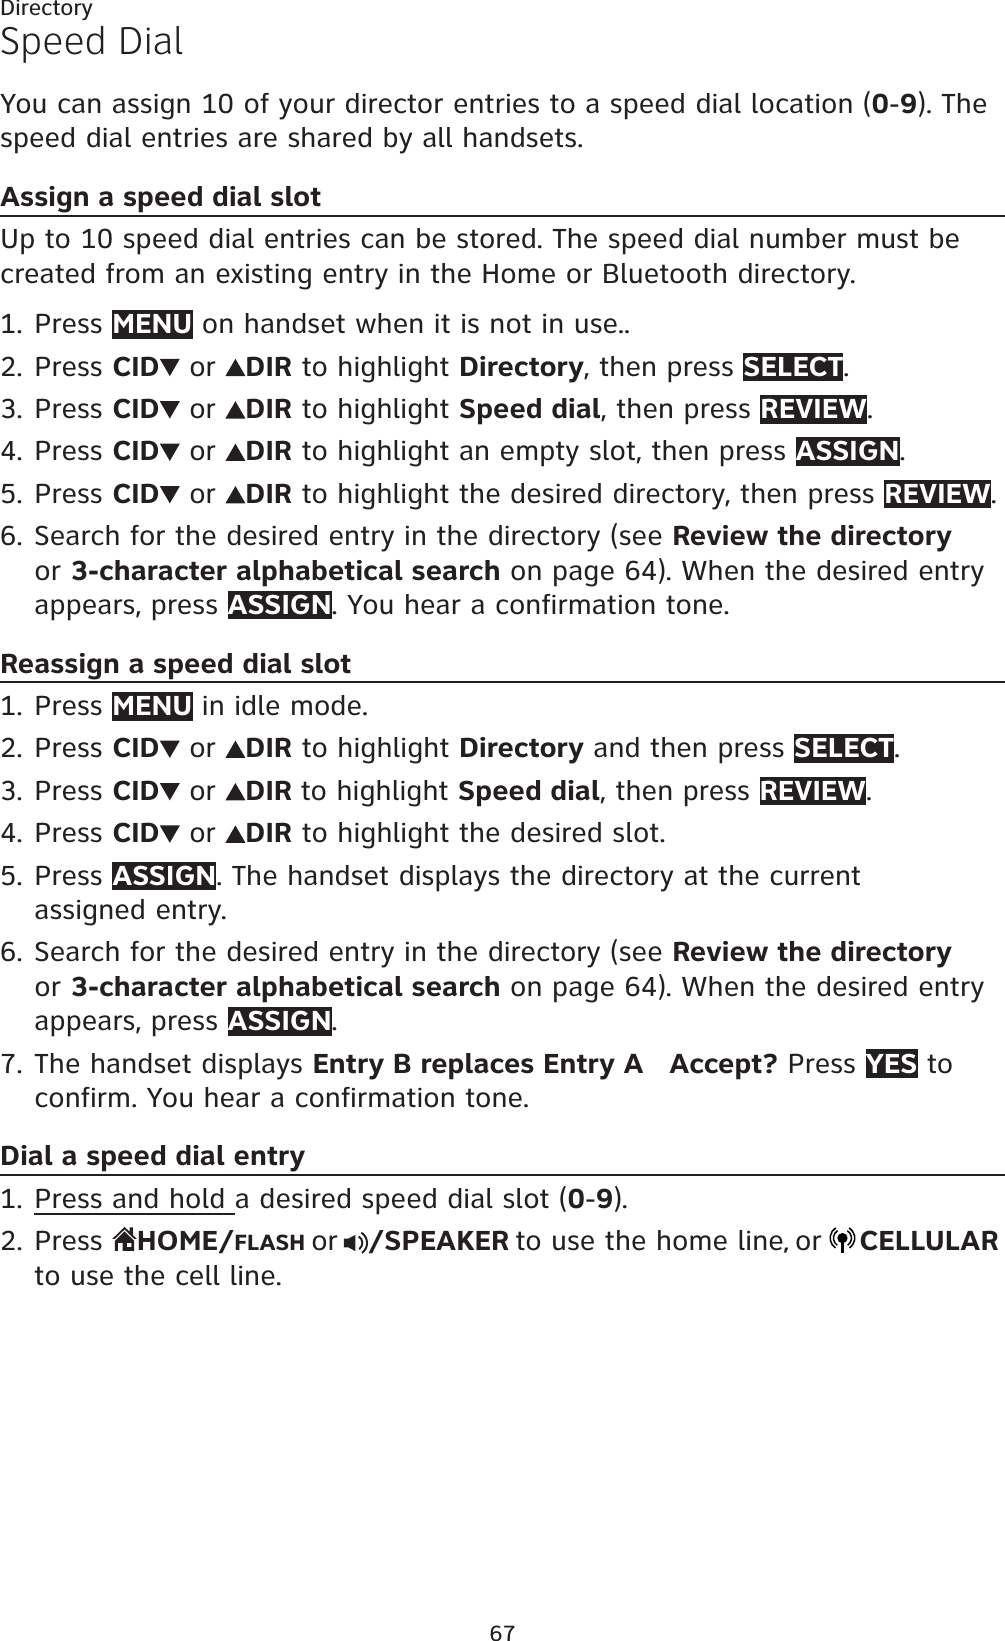 67DirectorySpeed DialYou can assign 10 of your director entries to a speed dial location (0-9). Thespeed dial entries are shared by all handsets.Assign a speed dial slotUp to 10 speed dial entries can be stored. The speed dial number must be created from an existing entry in the Home or Bluetooth directory.Press MENU on handset when it is not in use..Press CID  or  DIR to highlight Directory, then press SELECT.Press CID  or  DIR to highlight Speed dial, then press REVIEW.Press CID  or  DIR to highlight an empty slot, then press ASSIGN.Press CID  or  DIR to highlight the desired directory, then press REVIEW.Search for the desired entry in the directory (see Review the directoryor 3-character alphabetical search on page 64). When the desired entry appears, press ASSIGN. You hear a confirmation tone.Reassign a speed dial slotPress MENU in idle mode.Press CID  or  DIR to highlight Directory and then press SELECT.Press CID  or  DIR to highlight Speed dial, then press REVIEW.Press CID  or  DIR to highlight the desired slot.Press ASSIGN. The handset displays the directory at the current assigned entry.Search for the desired entry in the directory (see Review the directoryor 3-character alphabetical search on page 64). When the desired entry appears, press ASSIGN.The handset displays Entry B replaces Entry A   Accept? Press YES to confirm. You hear a confirmation tone.Dial a speed dial entryPress and hold a desired speed dial slot (0-9).Press  HOME/FLASH or /SPEAKER to use the home line,or CELLULARto use the cell line.1.2.3.4.5.6.1.2.3.4.5.6.7.1.2.